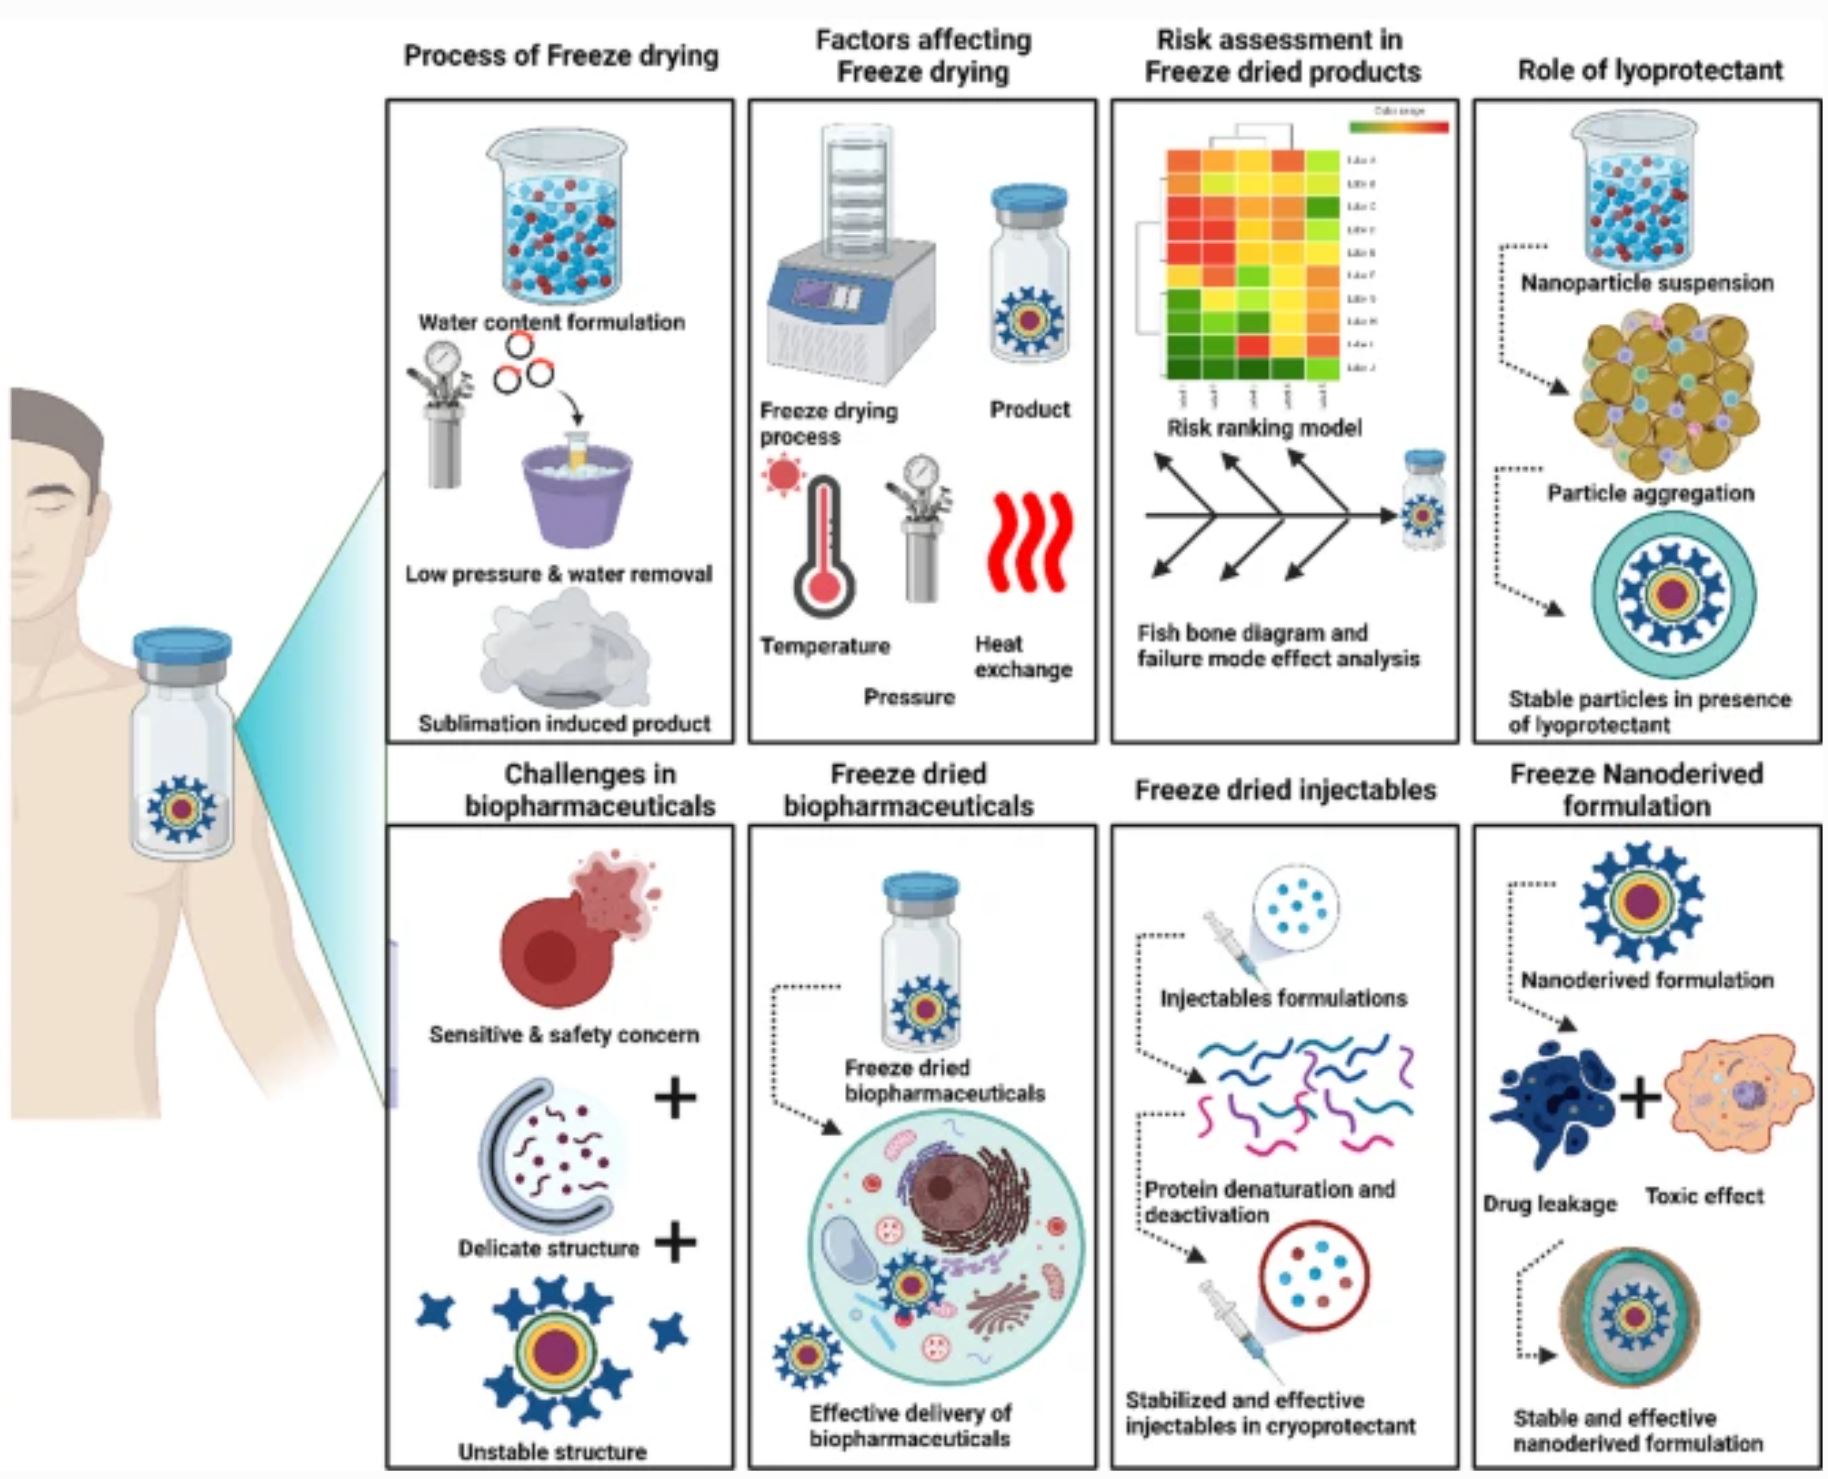 Process development and quality attributes for the freeze-drying process in pharmaceuticals, biopharmaceuticals and nanomedicine delivery: a state-of-the-art review